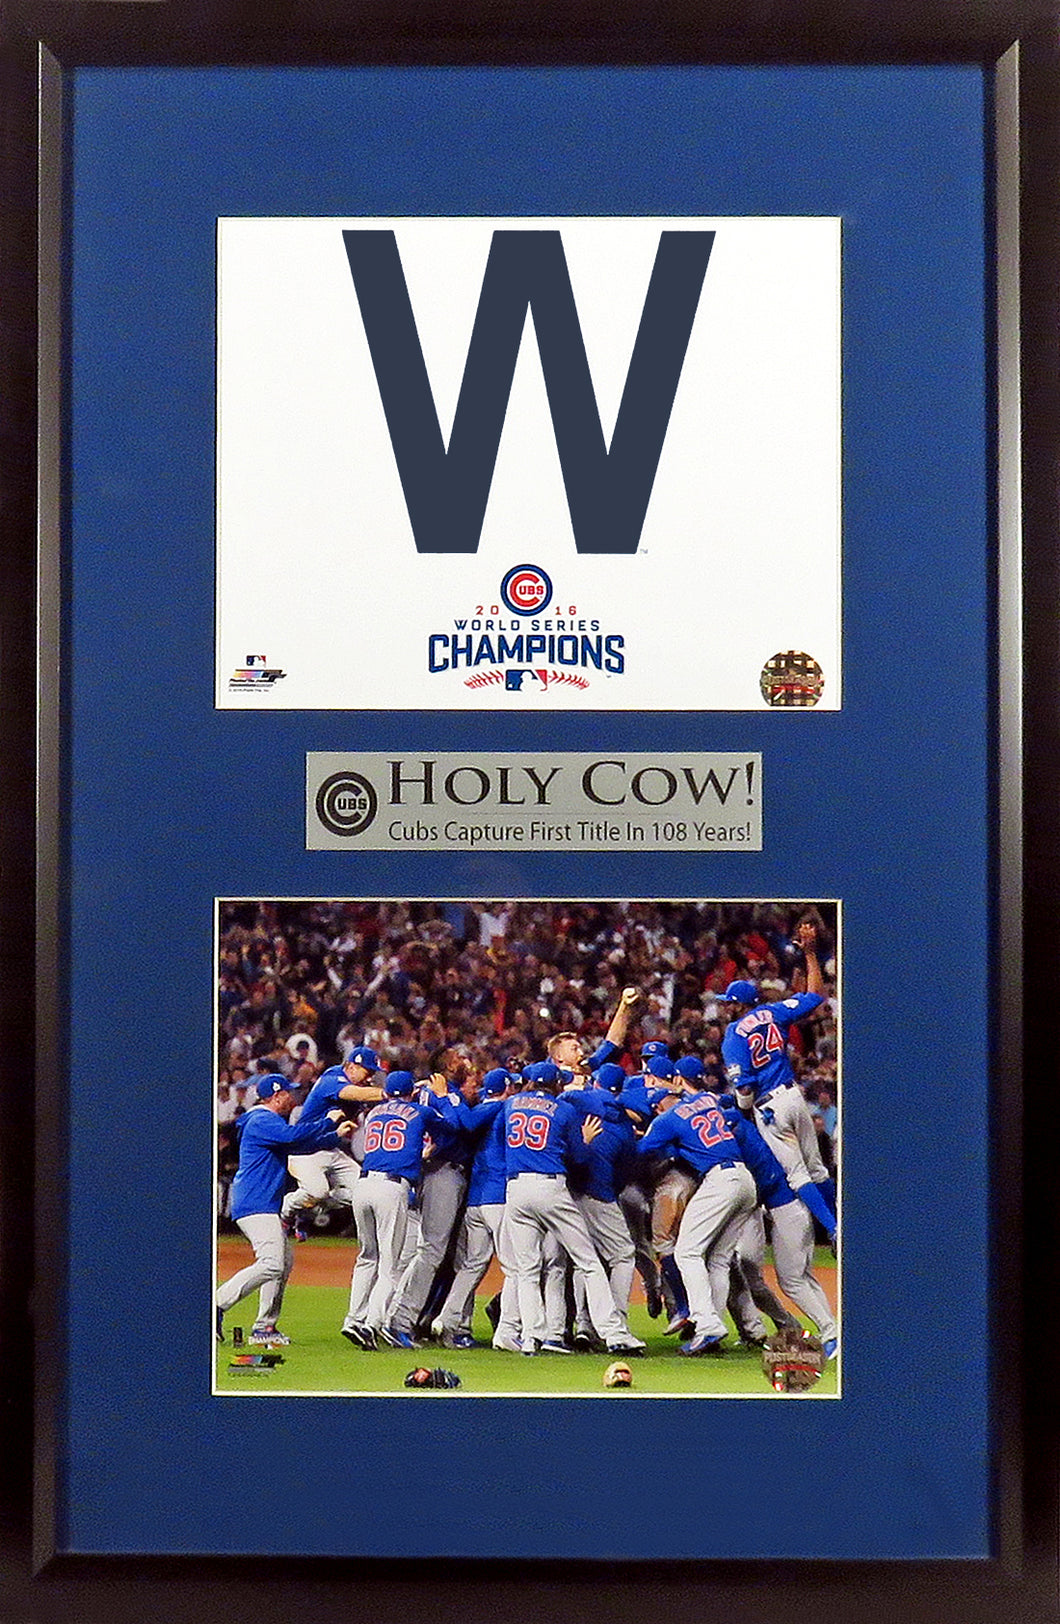 Chicago Cubs “2016 WS Champions” Framed Stack Display - Version II